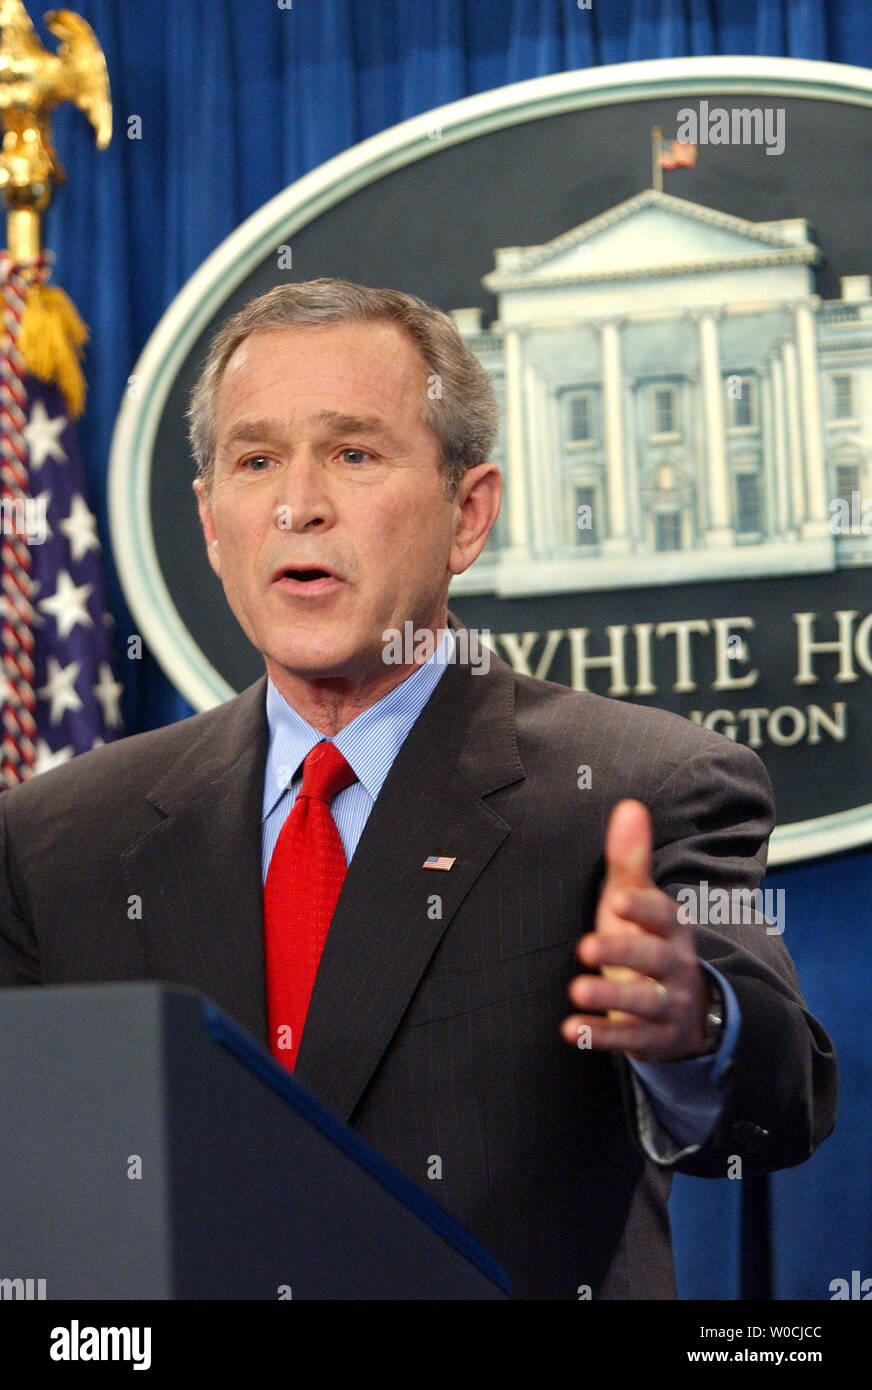 U.S. President George W. Bush speaks to reporters during a news conference in the Brady Press Briefing Room of the White House on March 16, 2005. Bush discussed a wide range of subjects, including social security and Iraq, and announced Deputy Defense Secretary Paul Wolfowitz as his nominee to head the World Bank.   (UPI Photo/Roger L. Wollenberg) Stock Photo